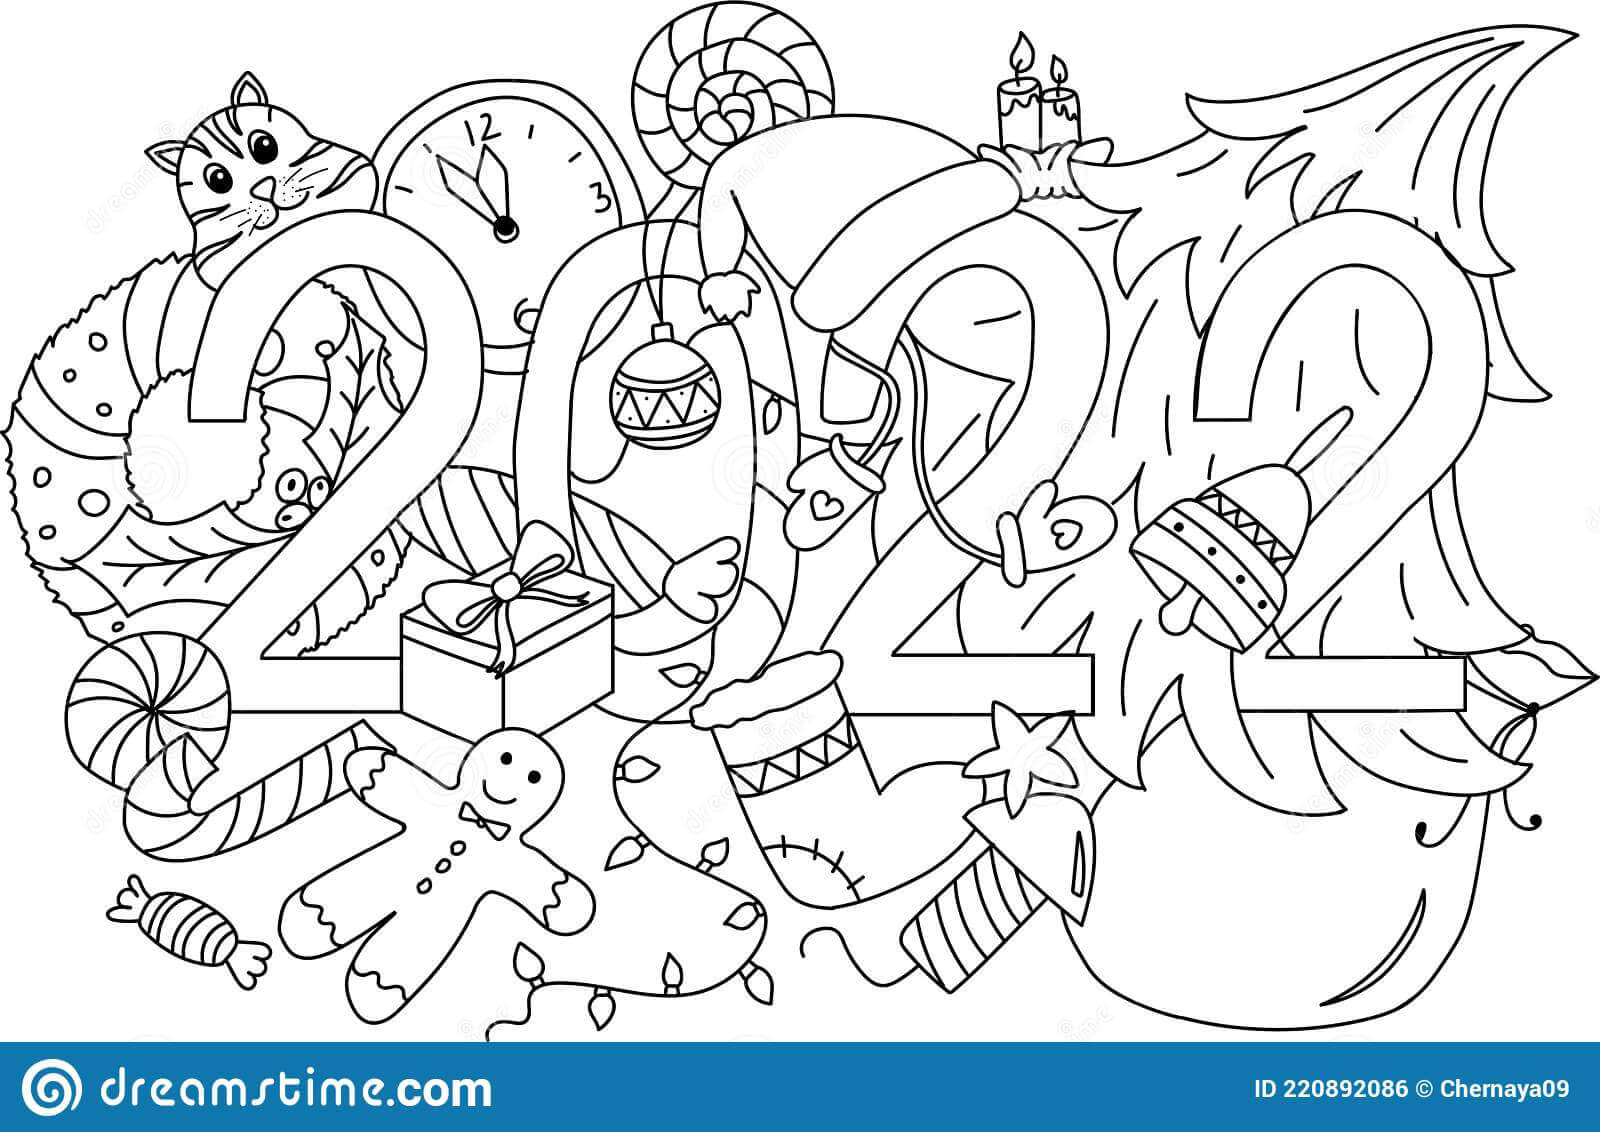 winter coloring pages pdf | free online winter coloring pages | cute winter coloring pages